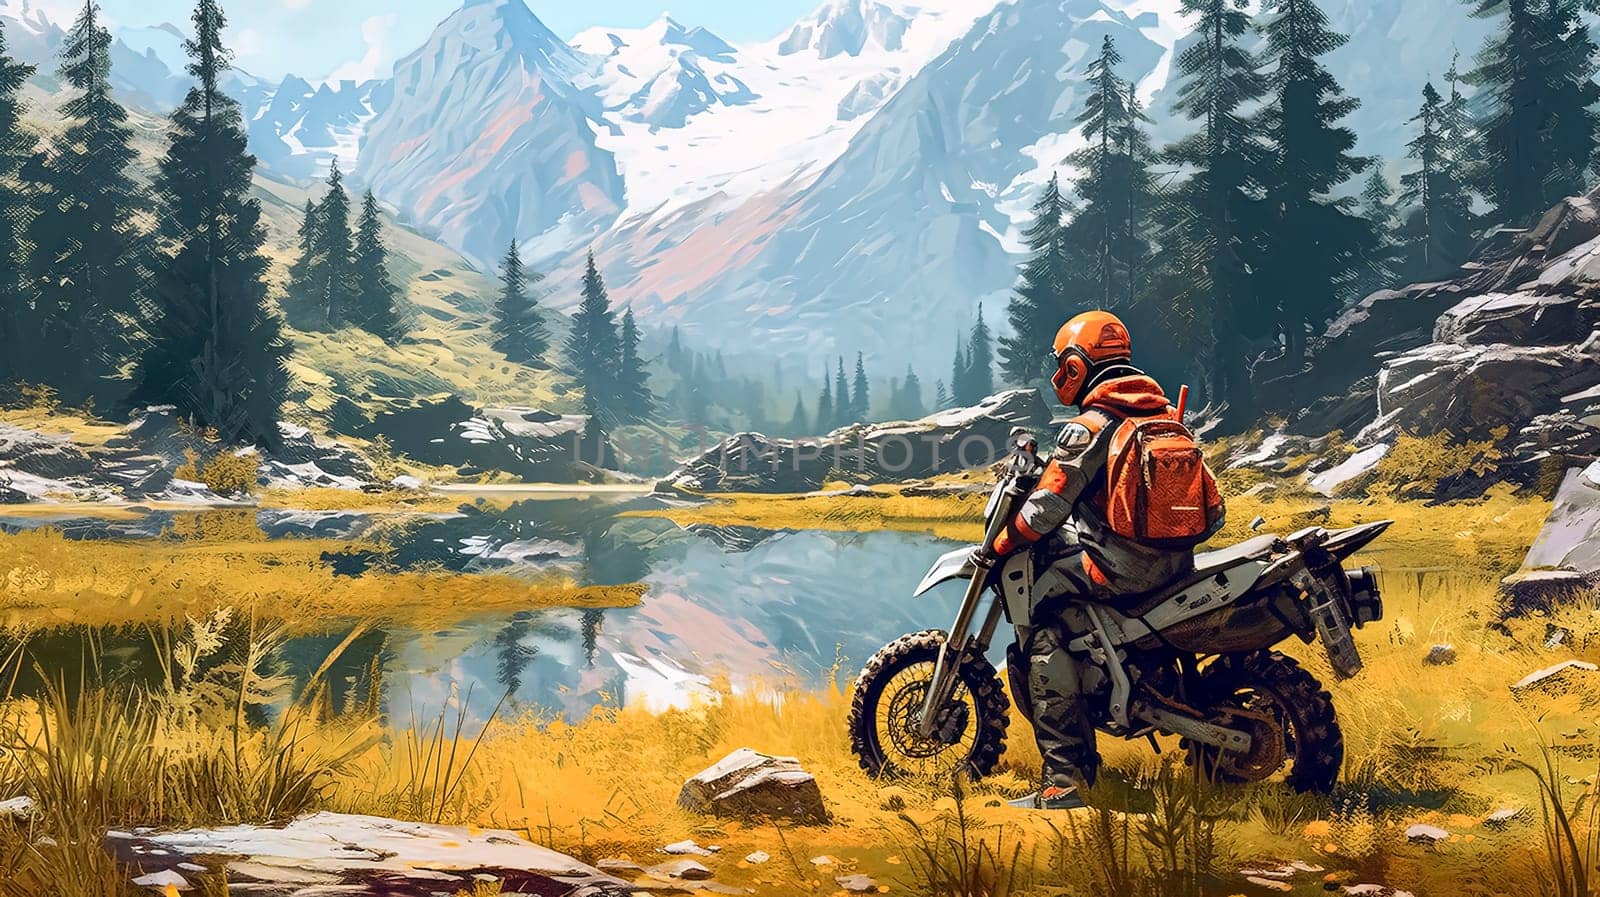 A man is riding a motorcycle in a forest with mountains in the background. The man is wearing an orange helmet and an orange backpack. The scene is peaceful and serene